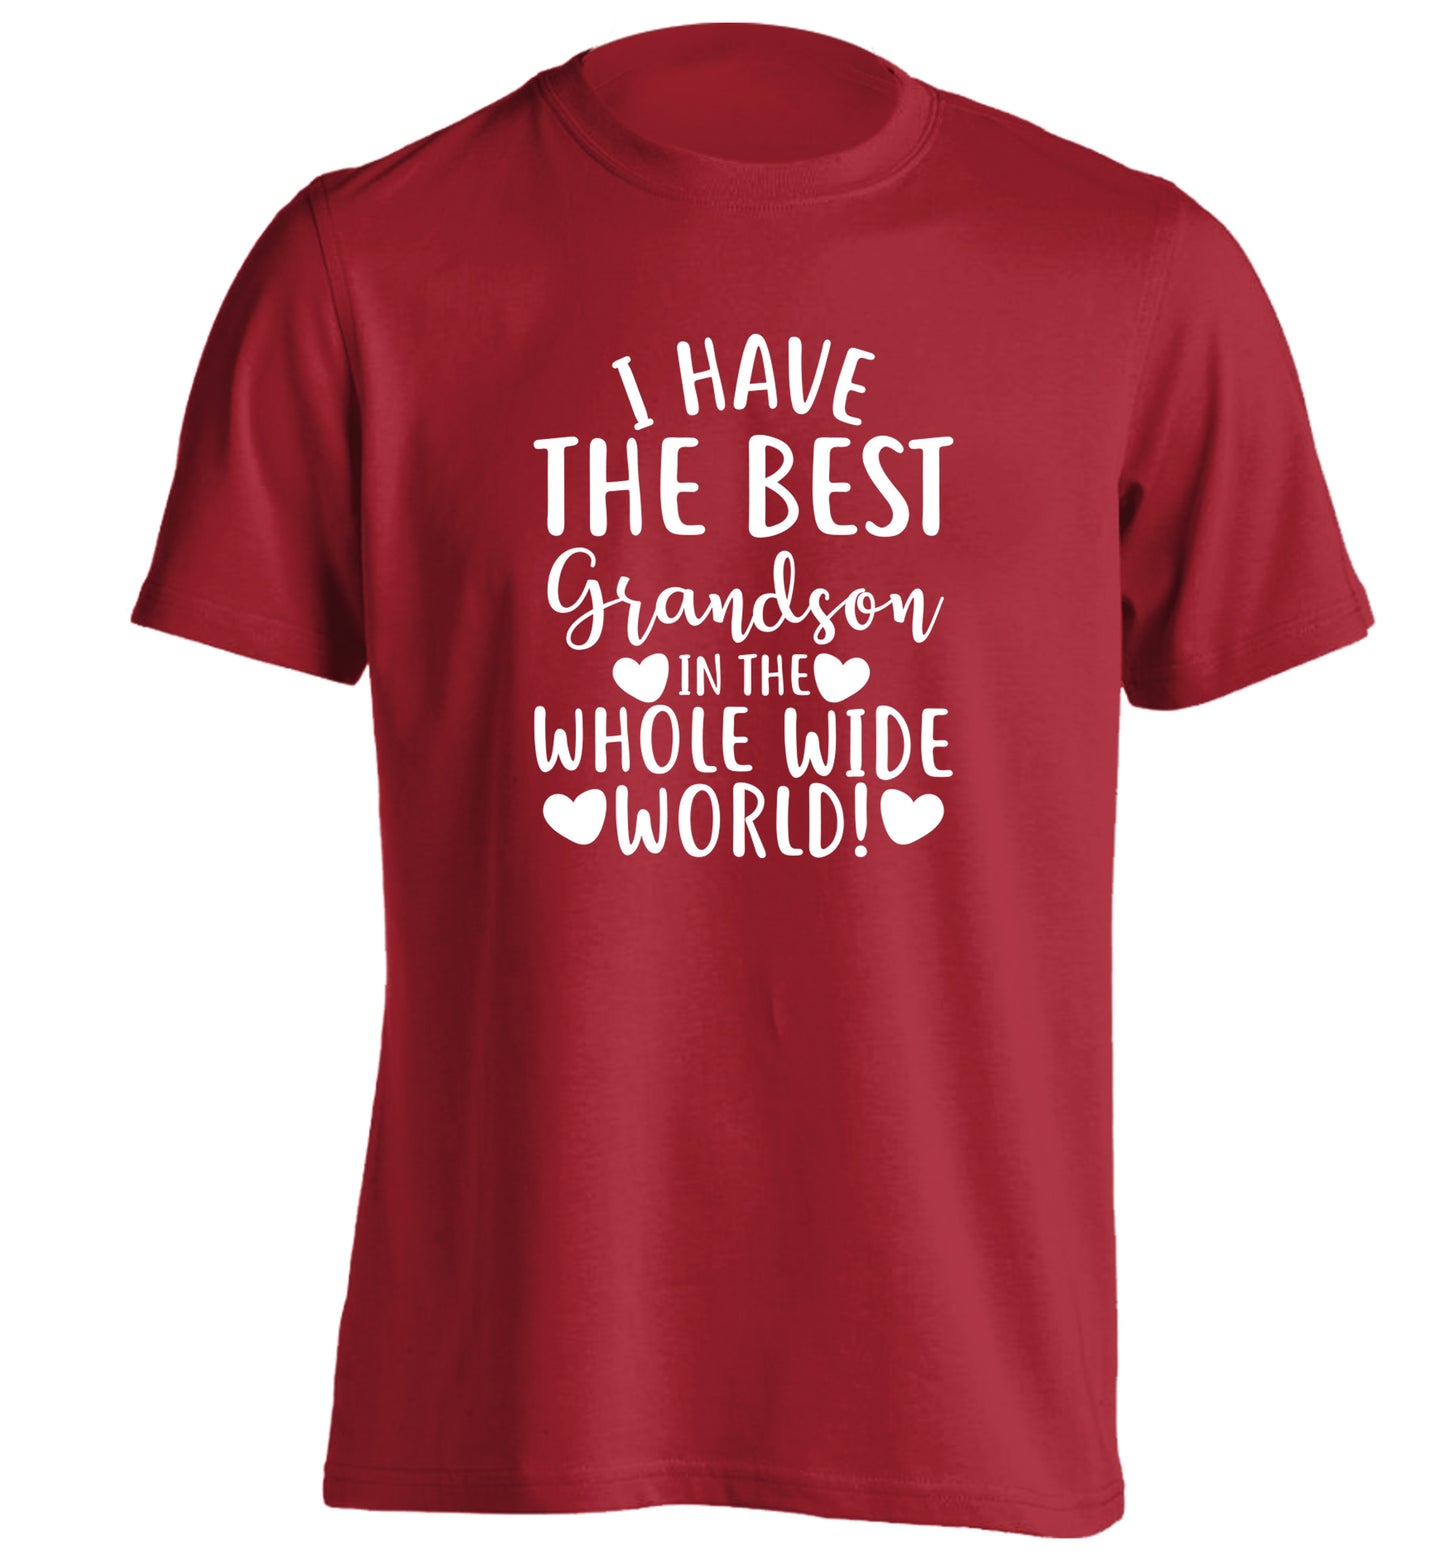 I have the best grandson in the whole wide world! adults unisex red Tshirt 2XL